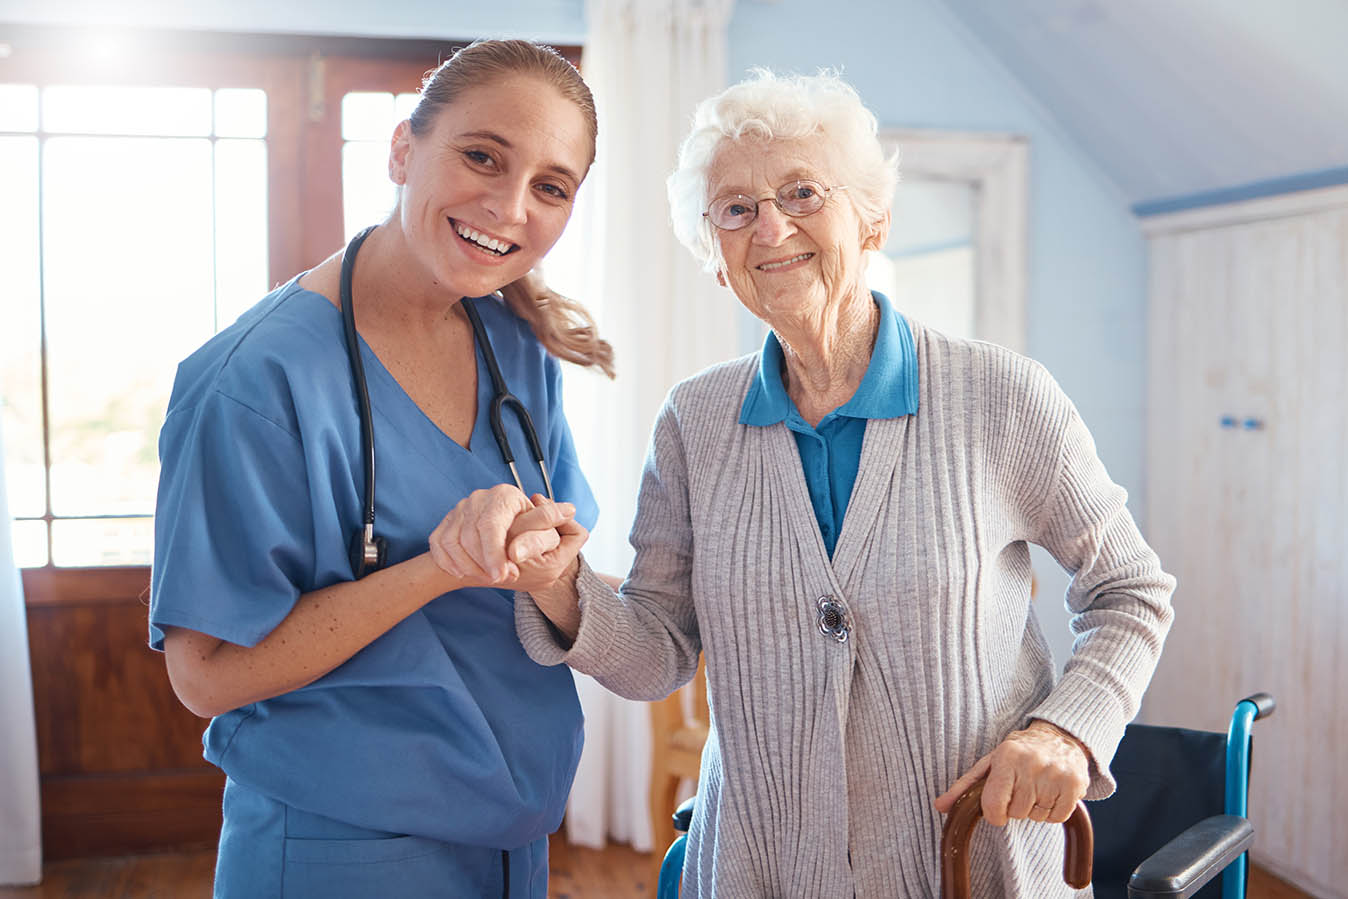 Recognising excellence: Aged care registered nurses’ payment for clinical skills and leadership